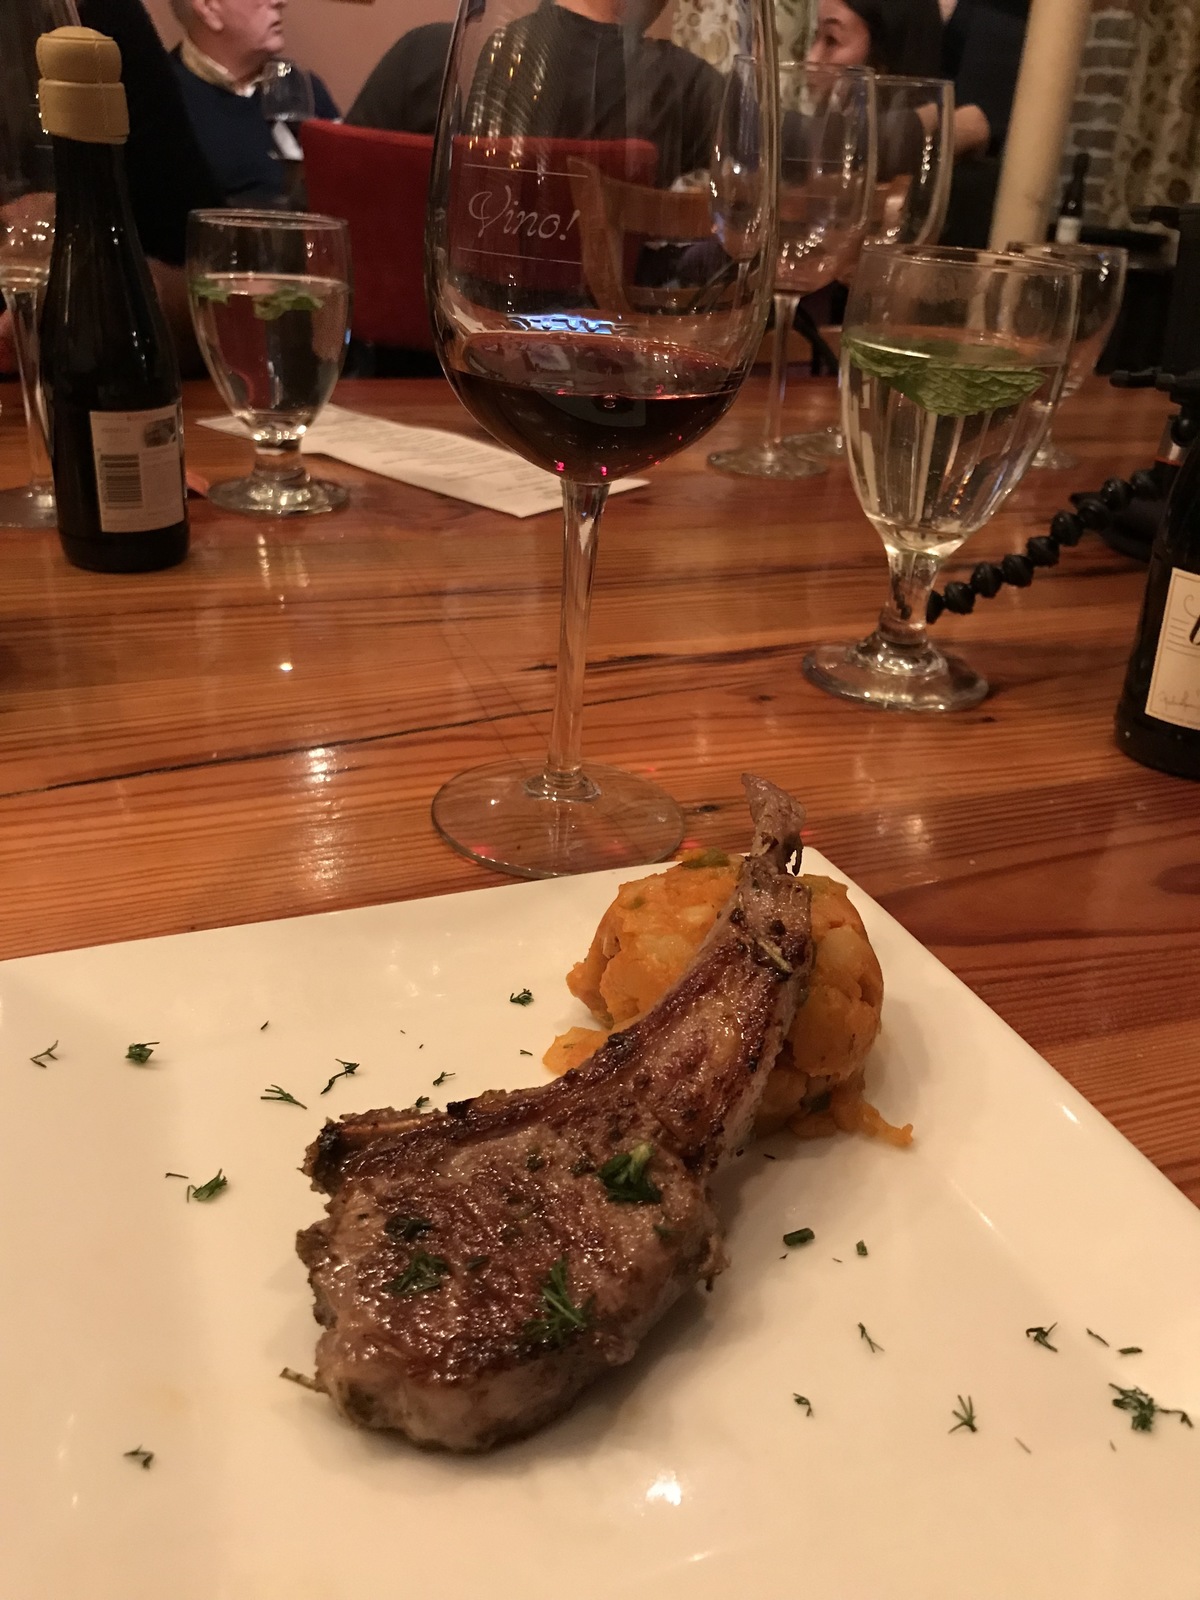 Wine and Cuisine Pairing at Pasha Mezze, A Culinary Trip to Turkey